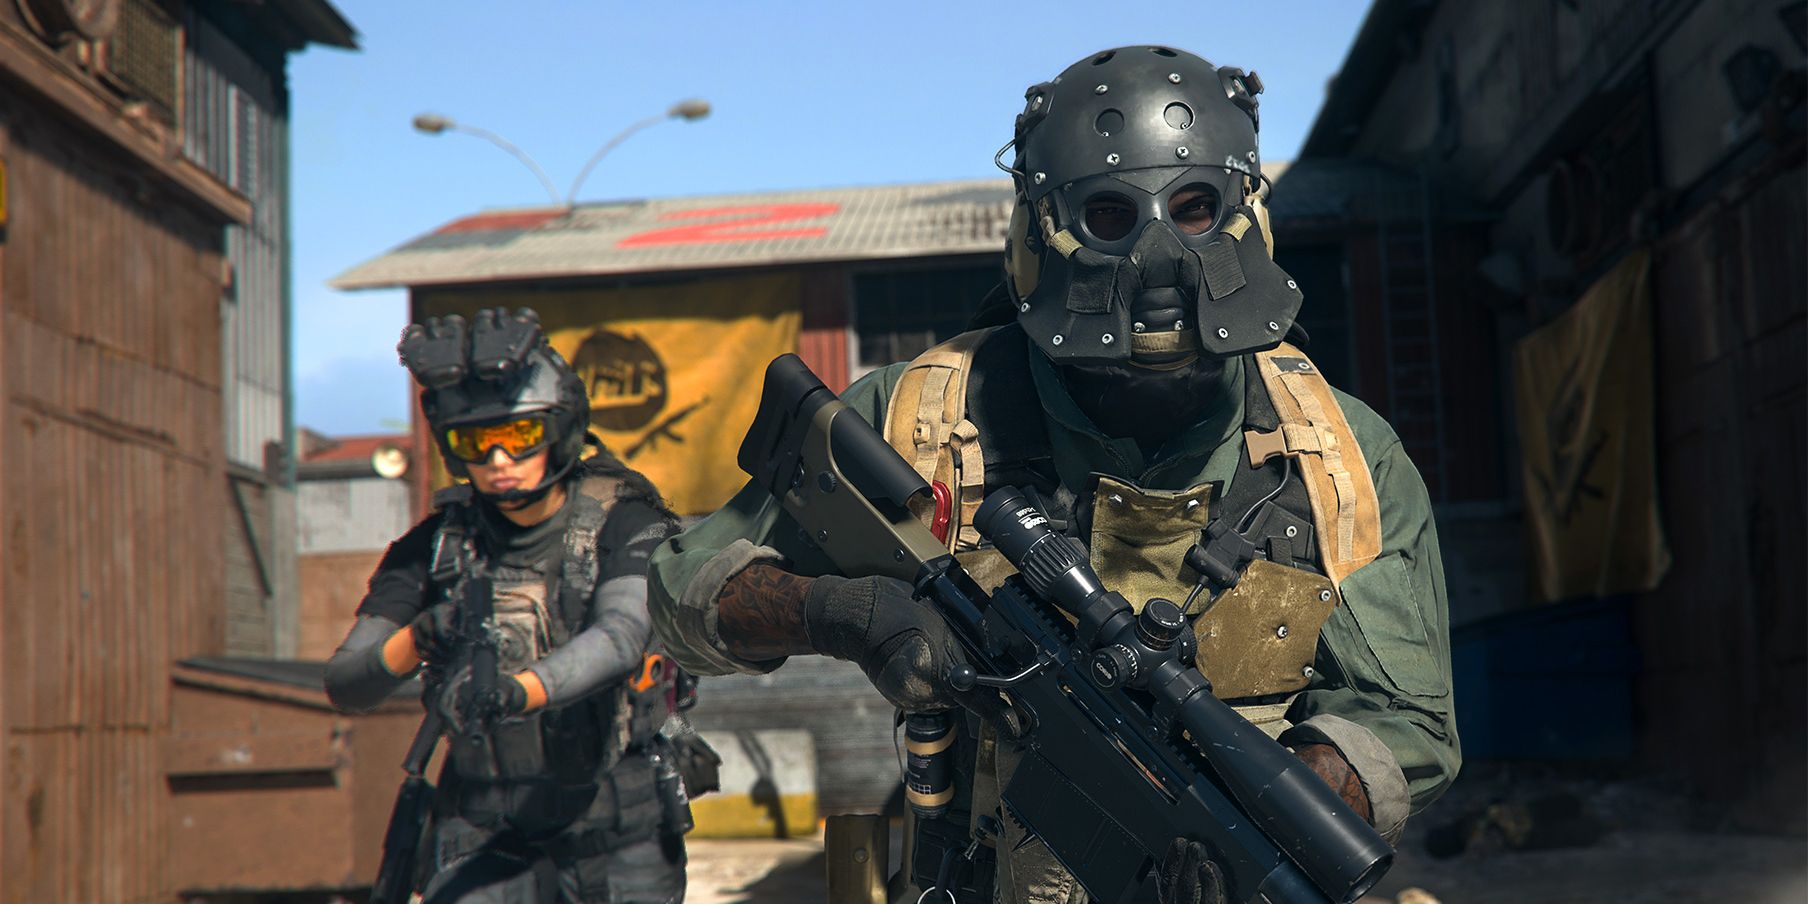 Two heavily armed player characters in Modern Warfare 2's Warzone mode, moving between two buildings.